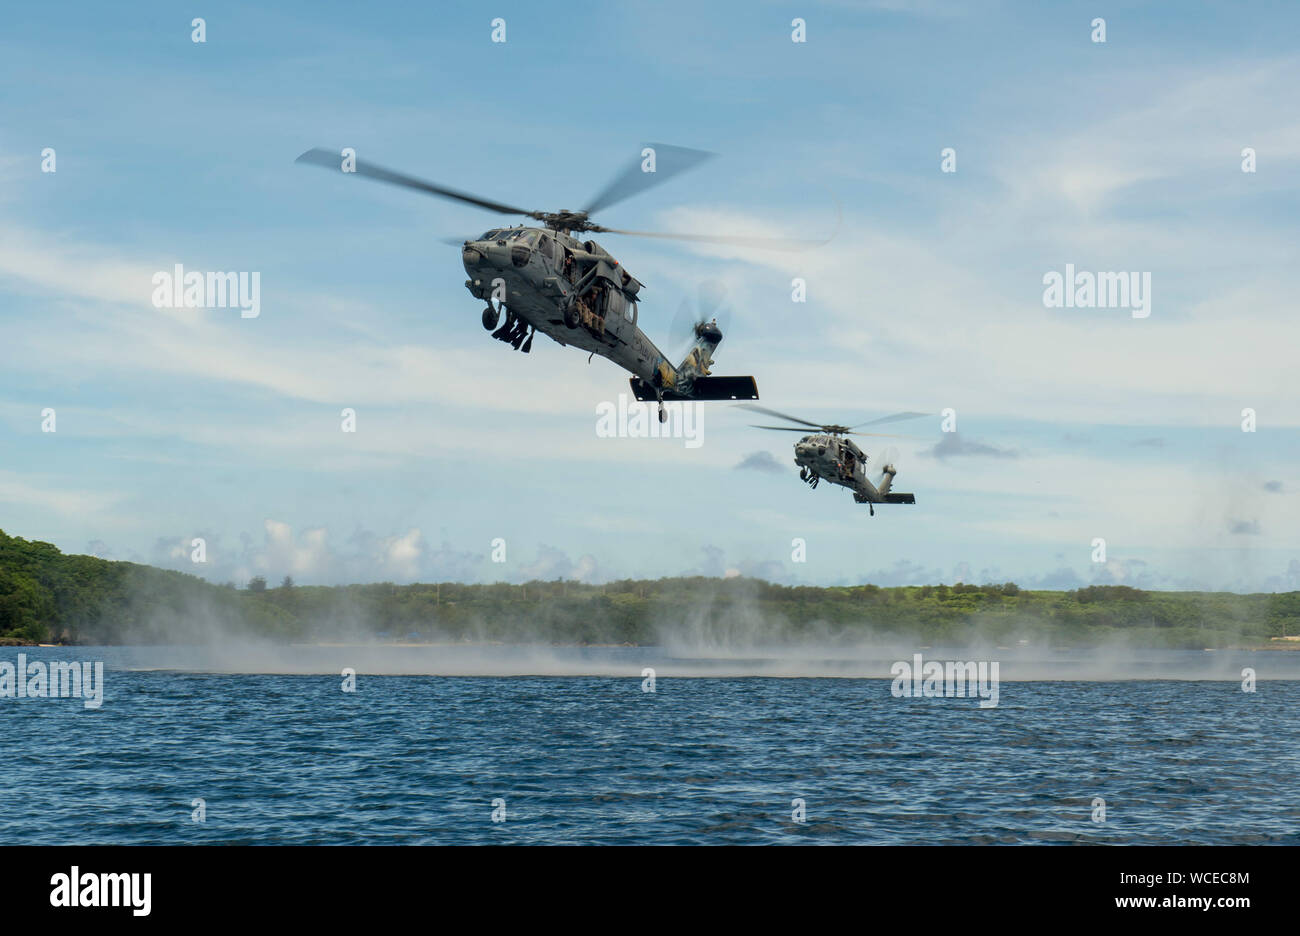 190827-N-QL471-1011  SANTA RITA, Guam (Aug. 27, 2019) MH-60S Seahawk helicopters, attached to the “Island Knights” of Helicopter Sea Combat Squadron (HSC) 25, carry U.S. Marines, assigned to 3rd Reconnaissance Battalion, 3rd Marine Division and 3rd Marine Division, Explosive Ordnance Disposal 1st Platoon, and members of Her Majesty’s New Zealand Ship Matataua (HMNZS Matataua) during a helocasting subject matter expert knowledge exchange as part of Exercise HYDRACRAB. HYDRACRAB is a quadrilateral exercise conducted by forces from Australia, Canada, New Zealand, and U.S. Naval forces. The purpos Stock Photo